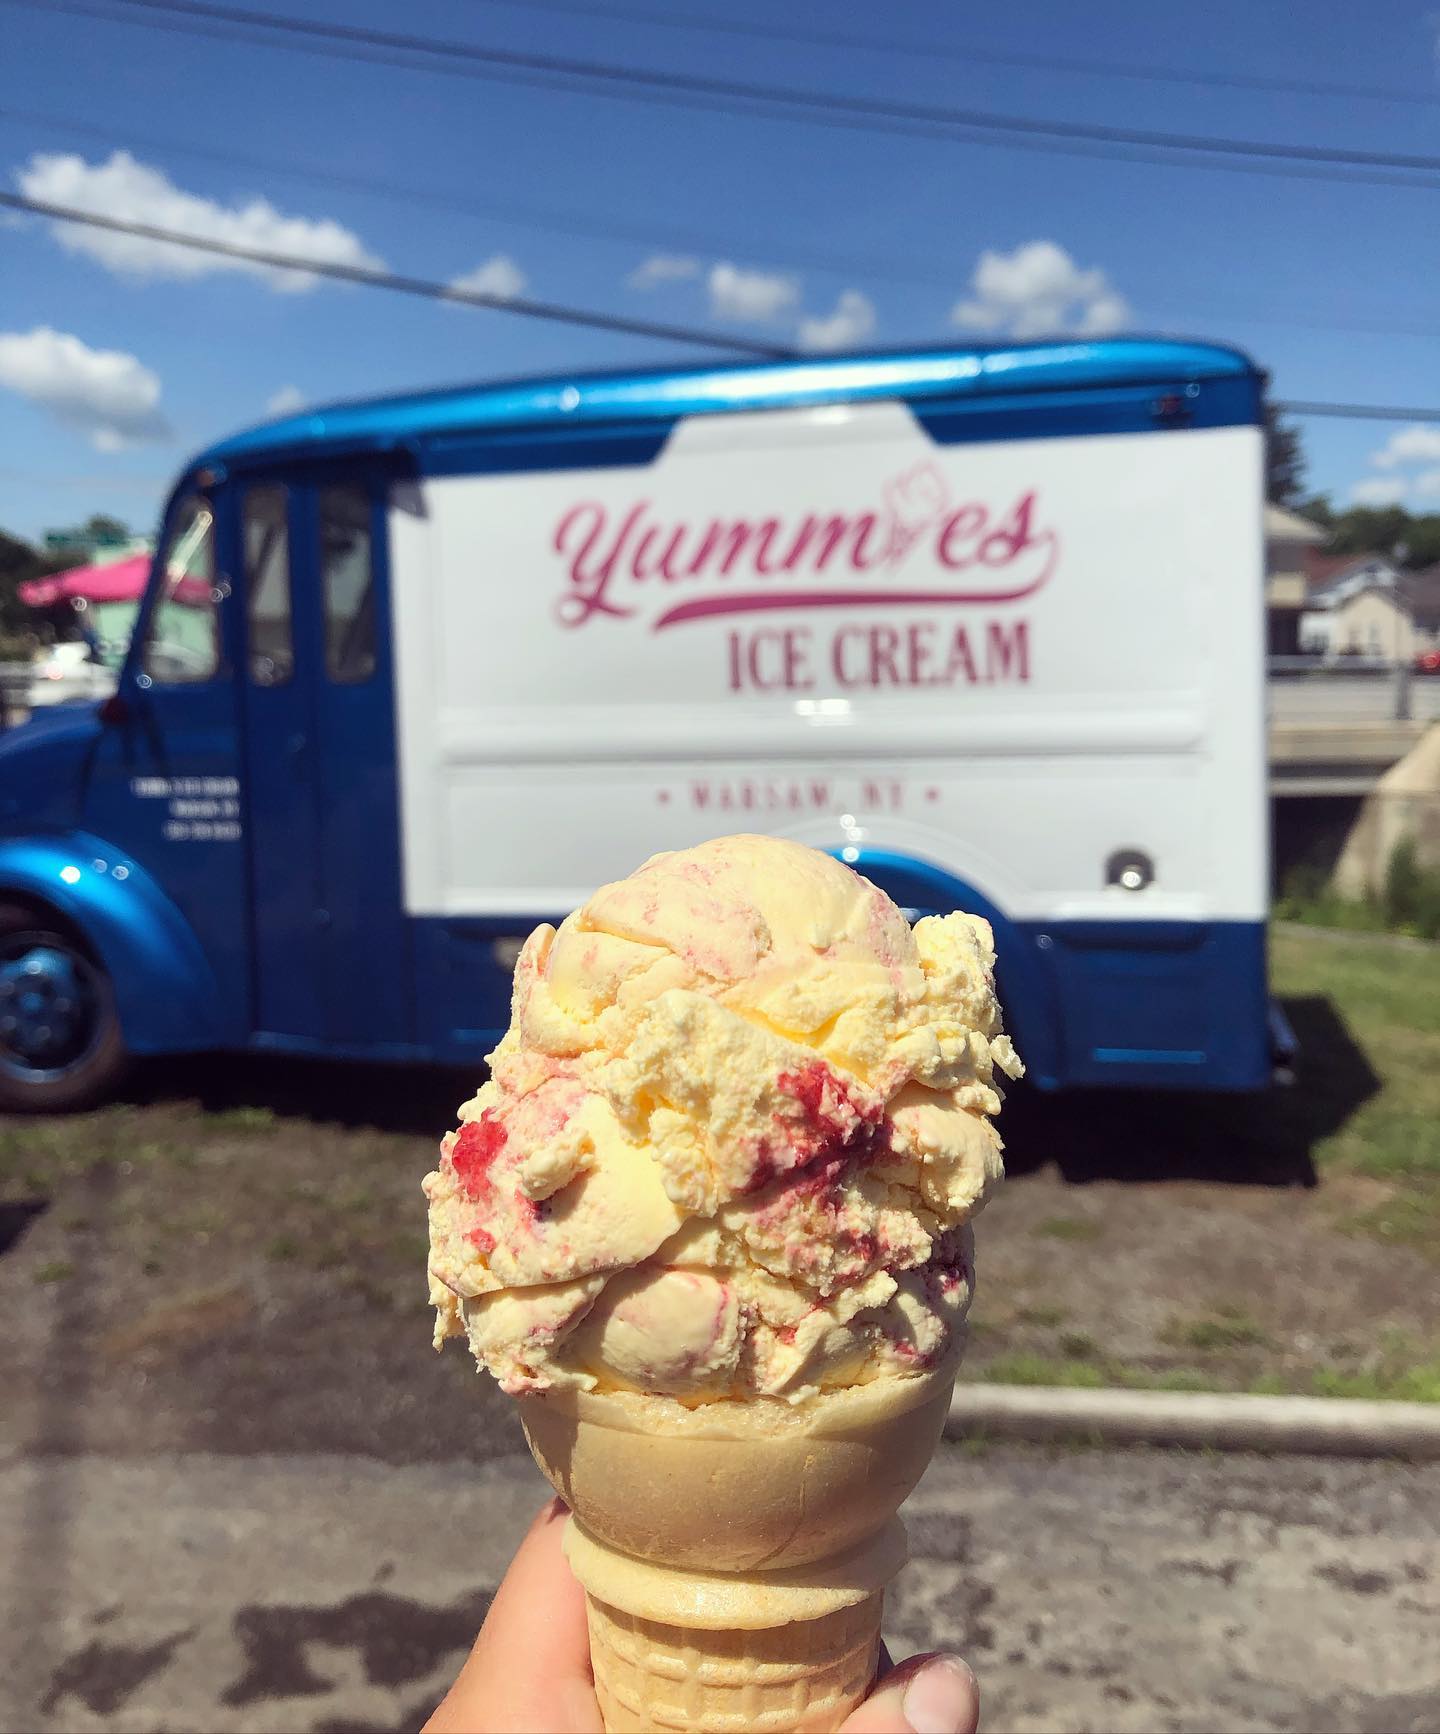 Yummies Ice Cream, 12 Center St ,Warsaw, Ny – Menus, Prices, Hours And Locations